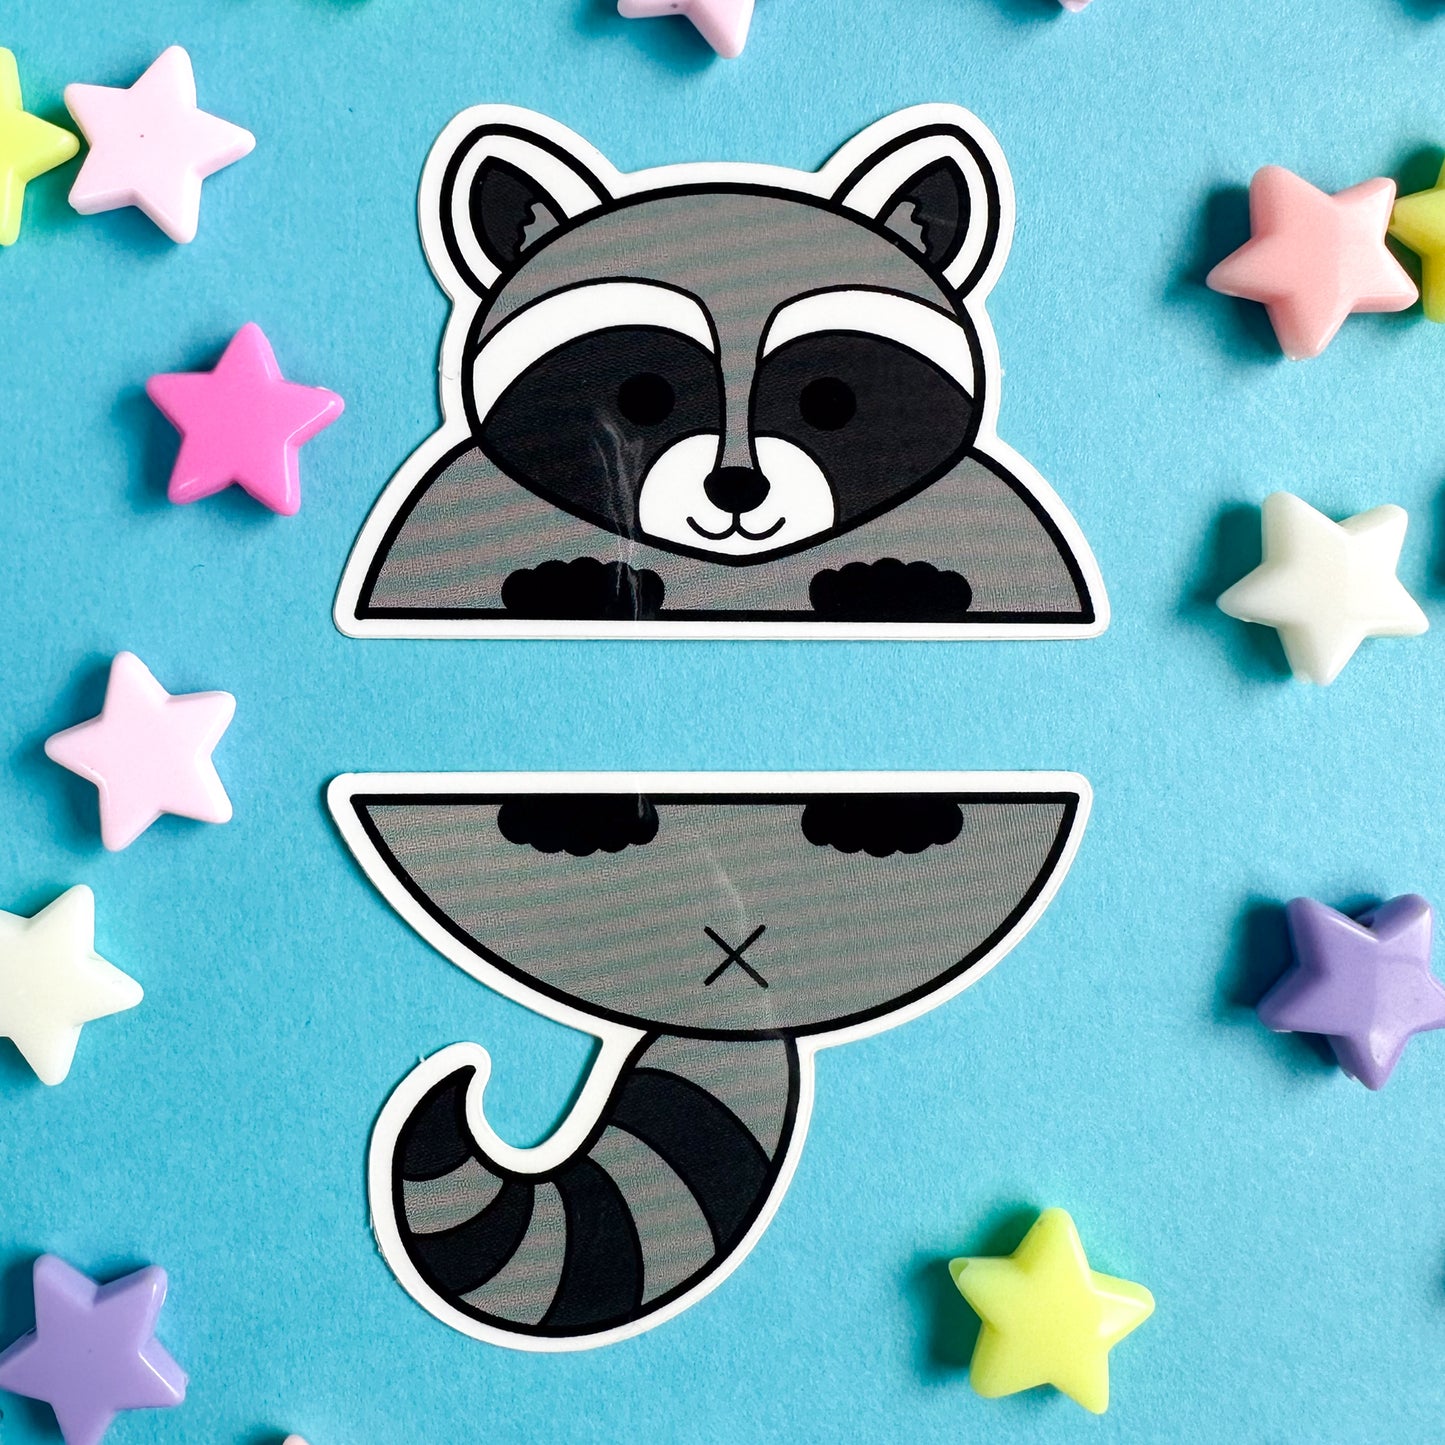 Two stickers that come together to form a cartoony illustration of a raccoon. The stickers are on a blue paper background with star beads scattered around them. 